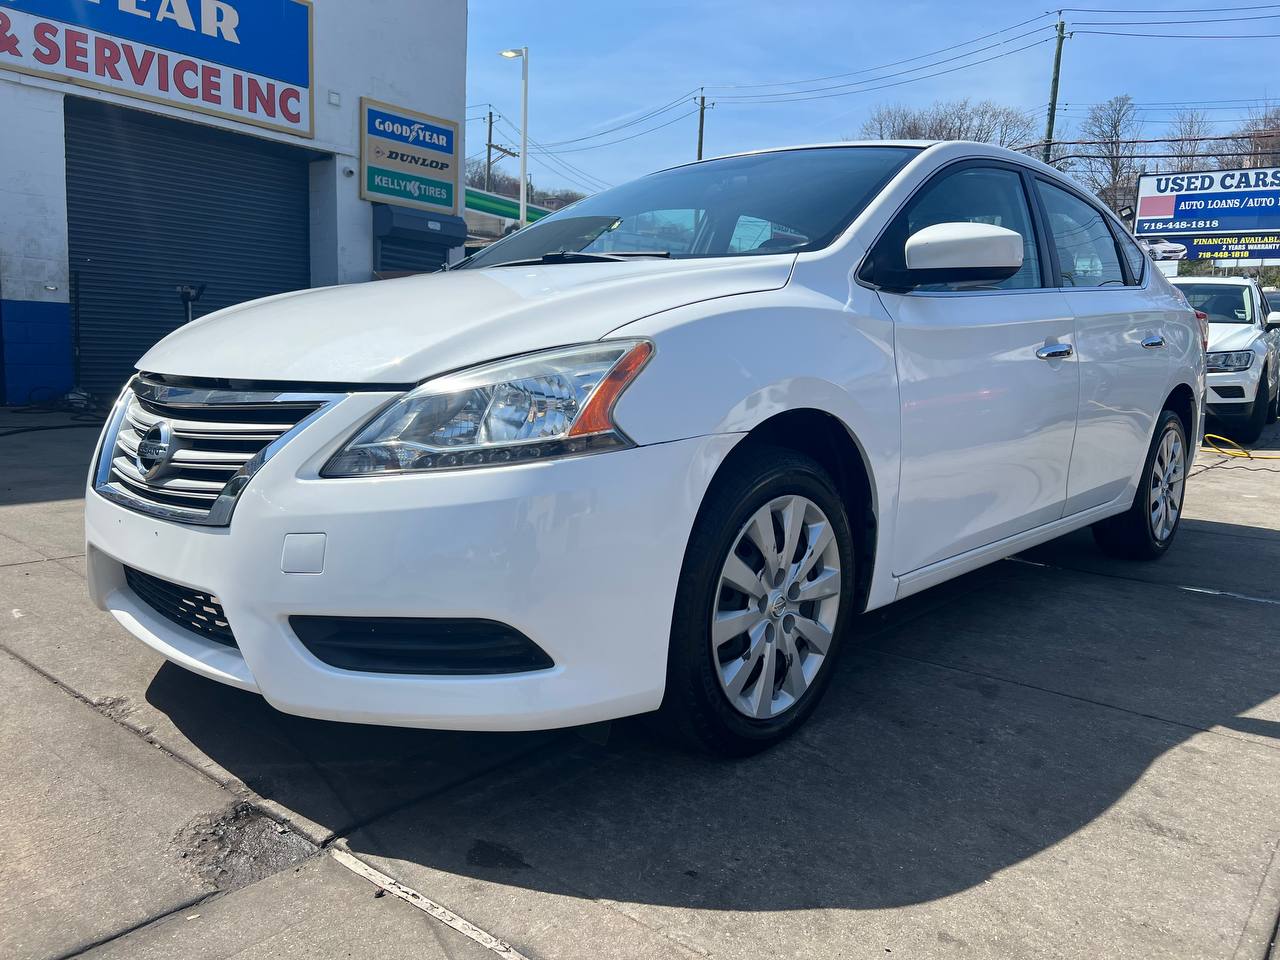 Used Car - 2014 Nissan Sentra SV for Sale in Staten Island, NY